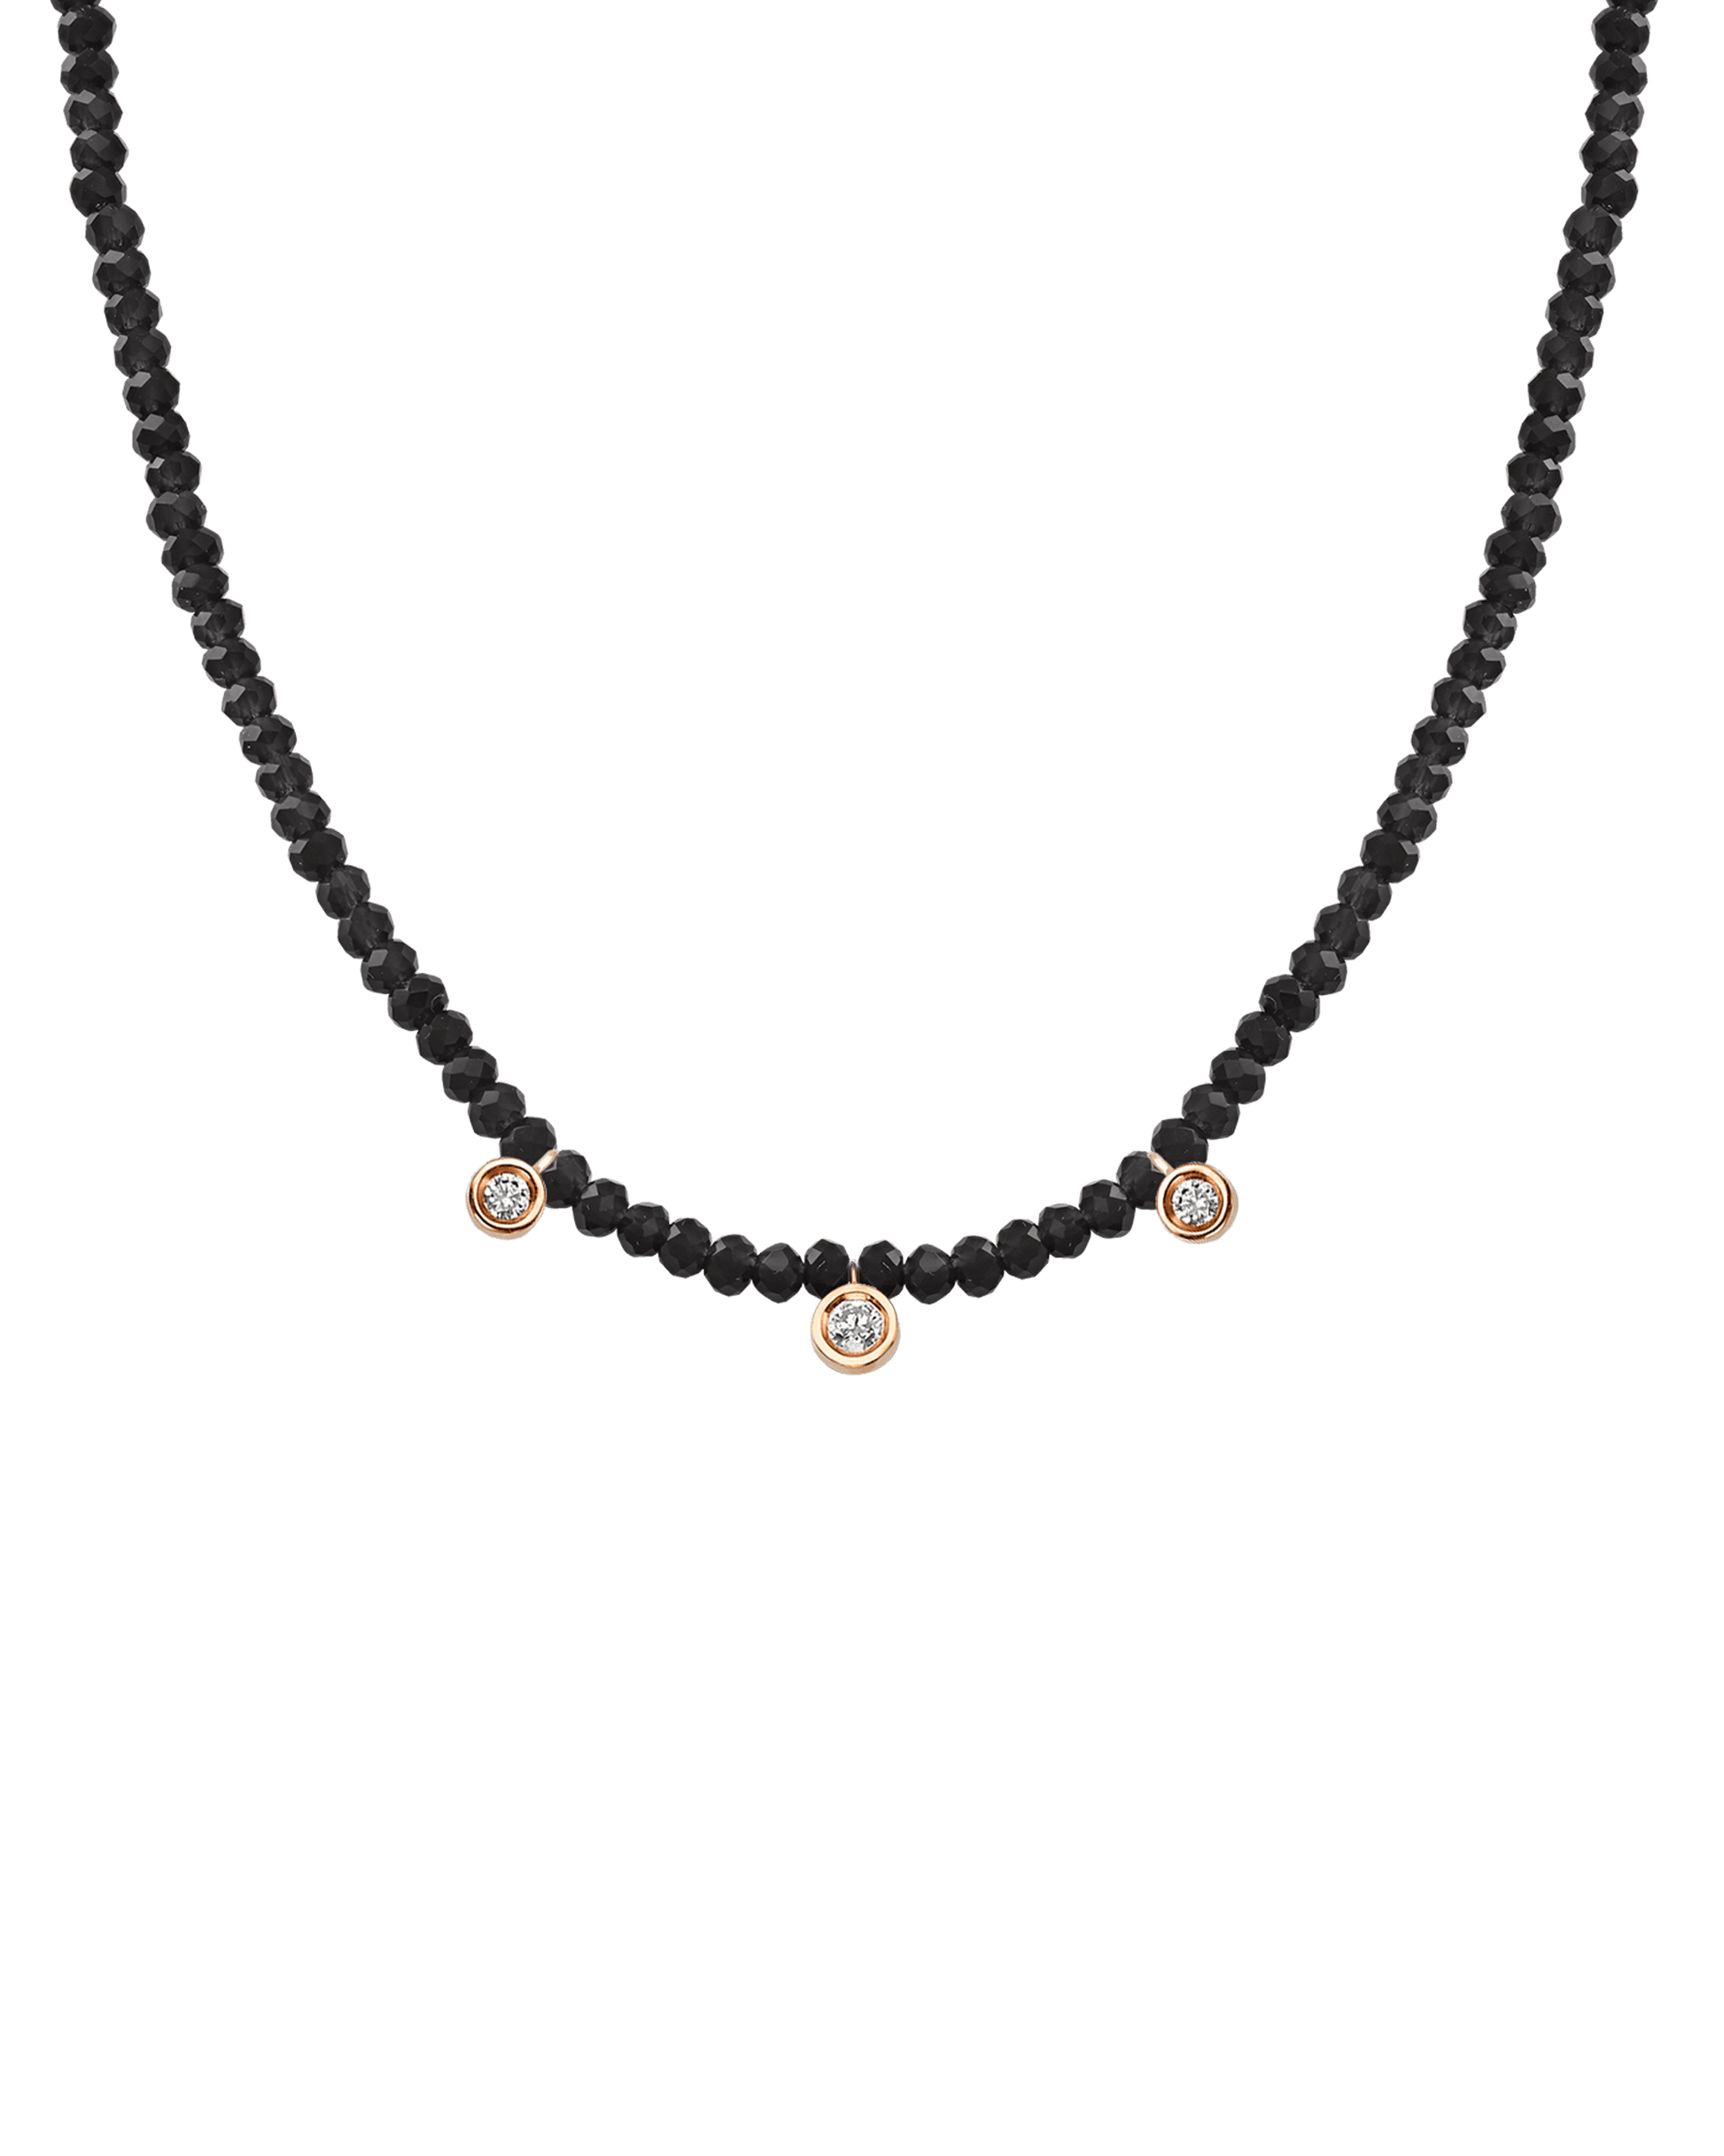 Apatite Gemstone & Three diamonds Necklace - 14K Rose Gold Necklaces magal-dev Glass Beads Black Spinnel 14" - Collar 